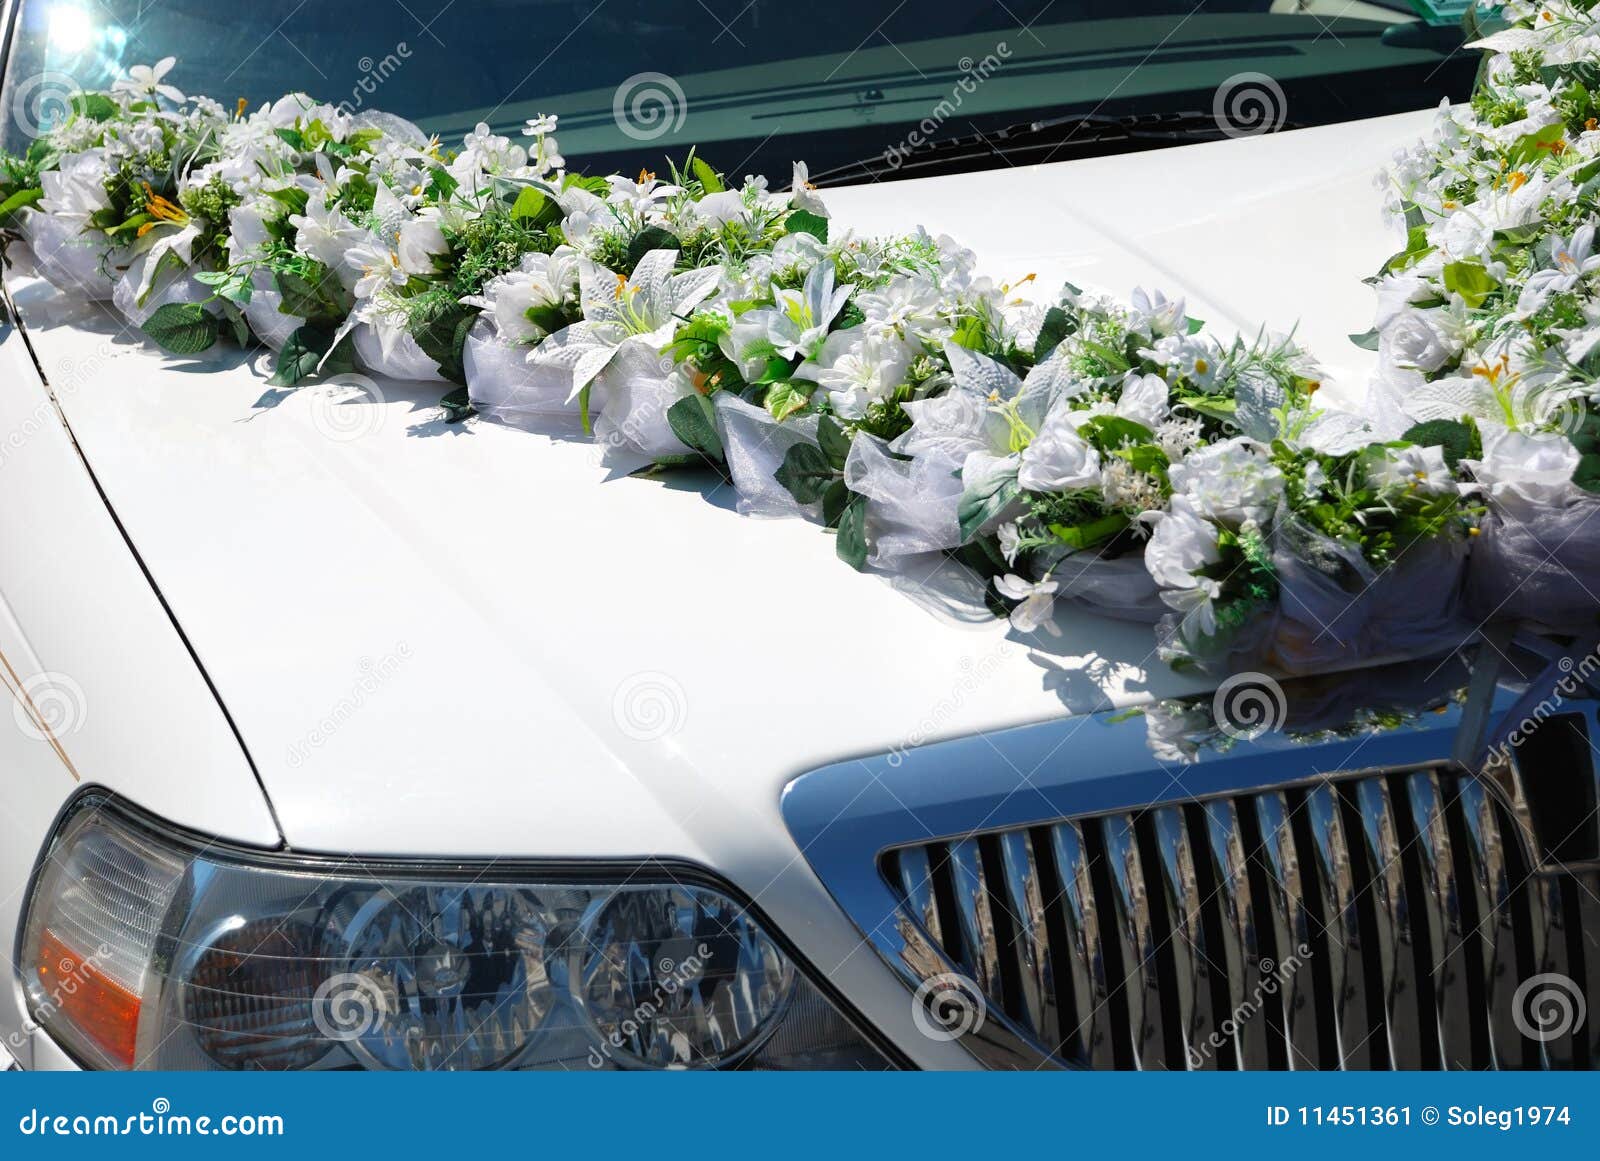 Wedding limousines with flowers